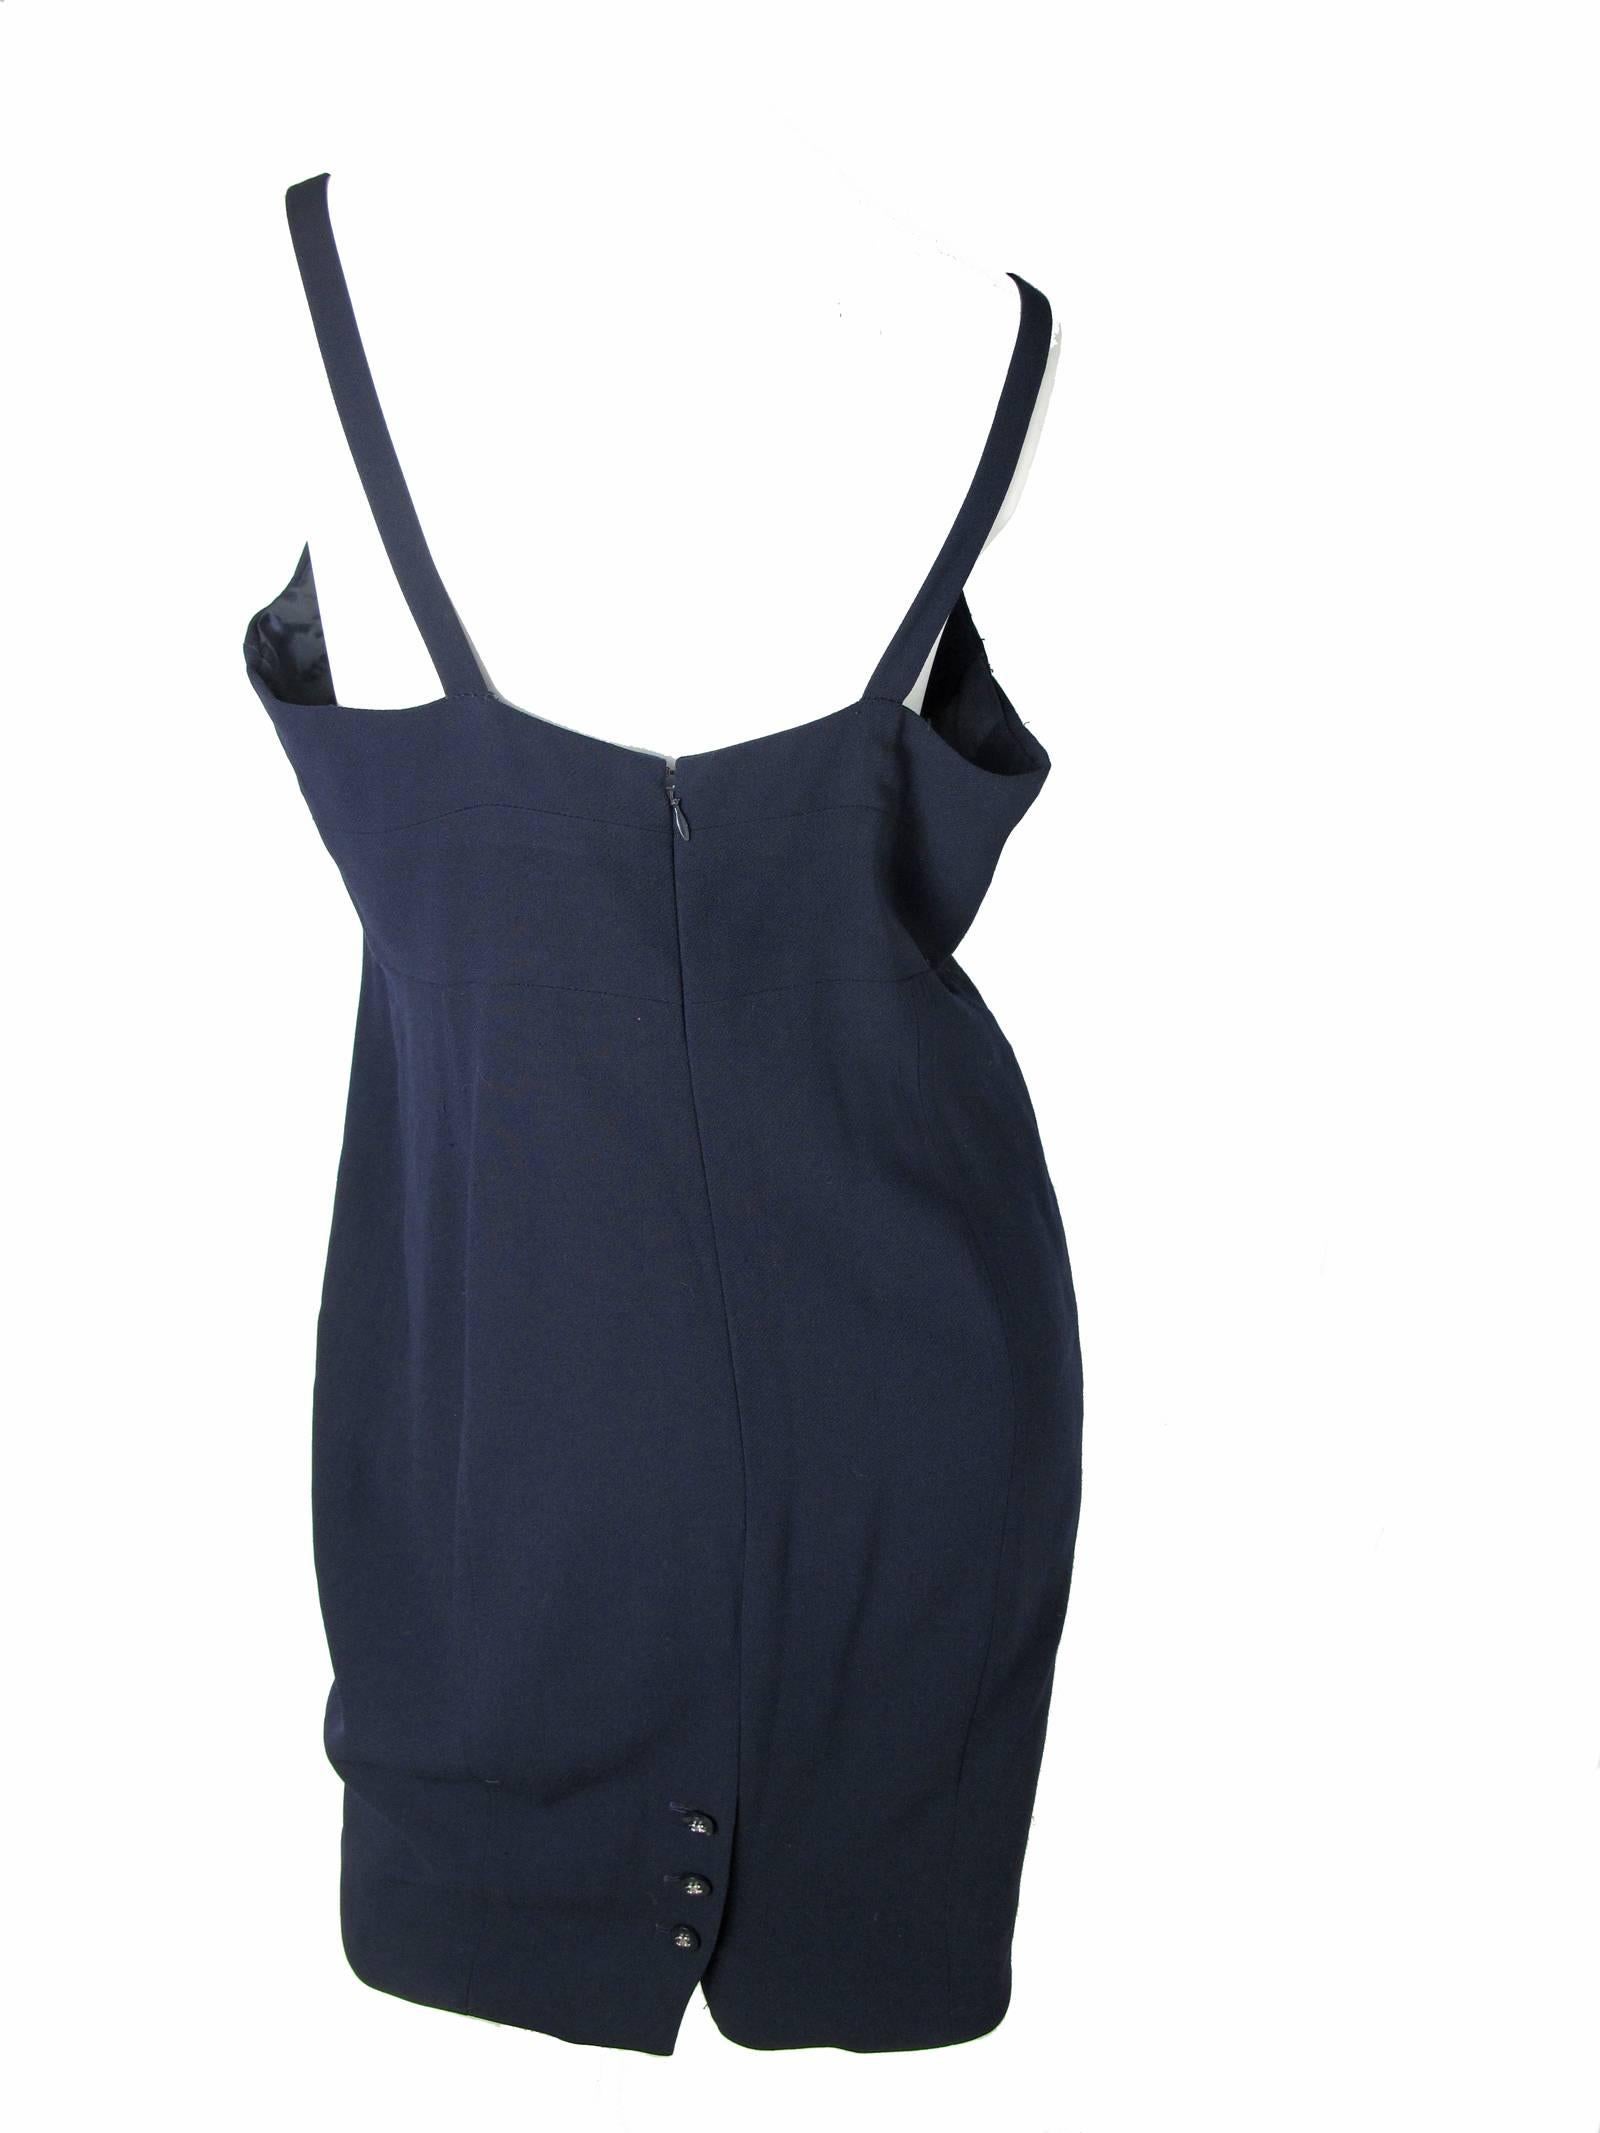 Chanel 1996 navy wool tank dress with 